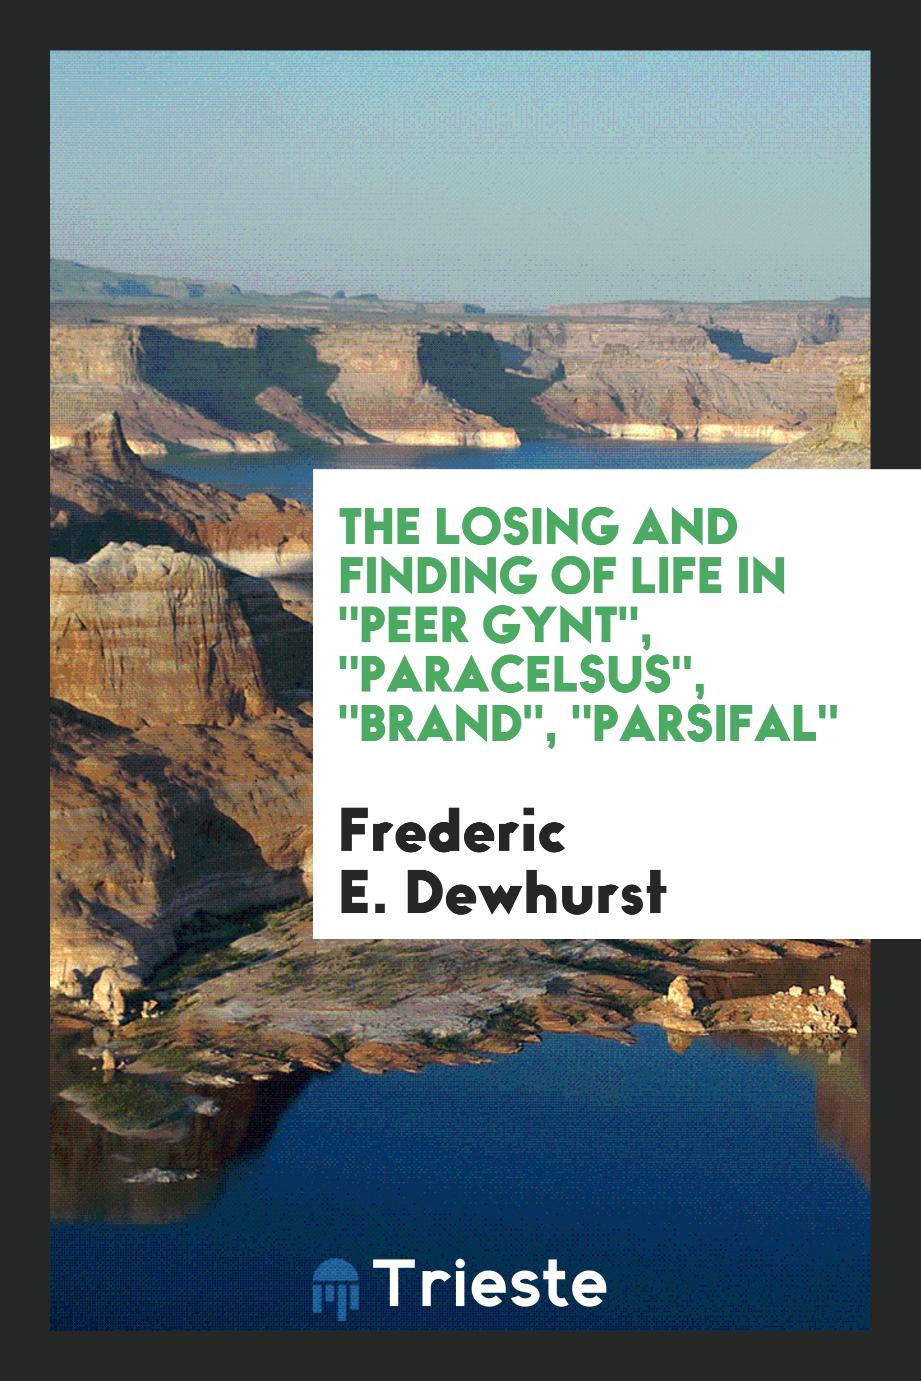 The Losing and Finding of Life in "Peer Gynt", "Paracelsus", "Brand", "Parsifal"